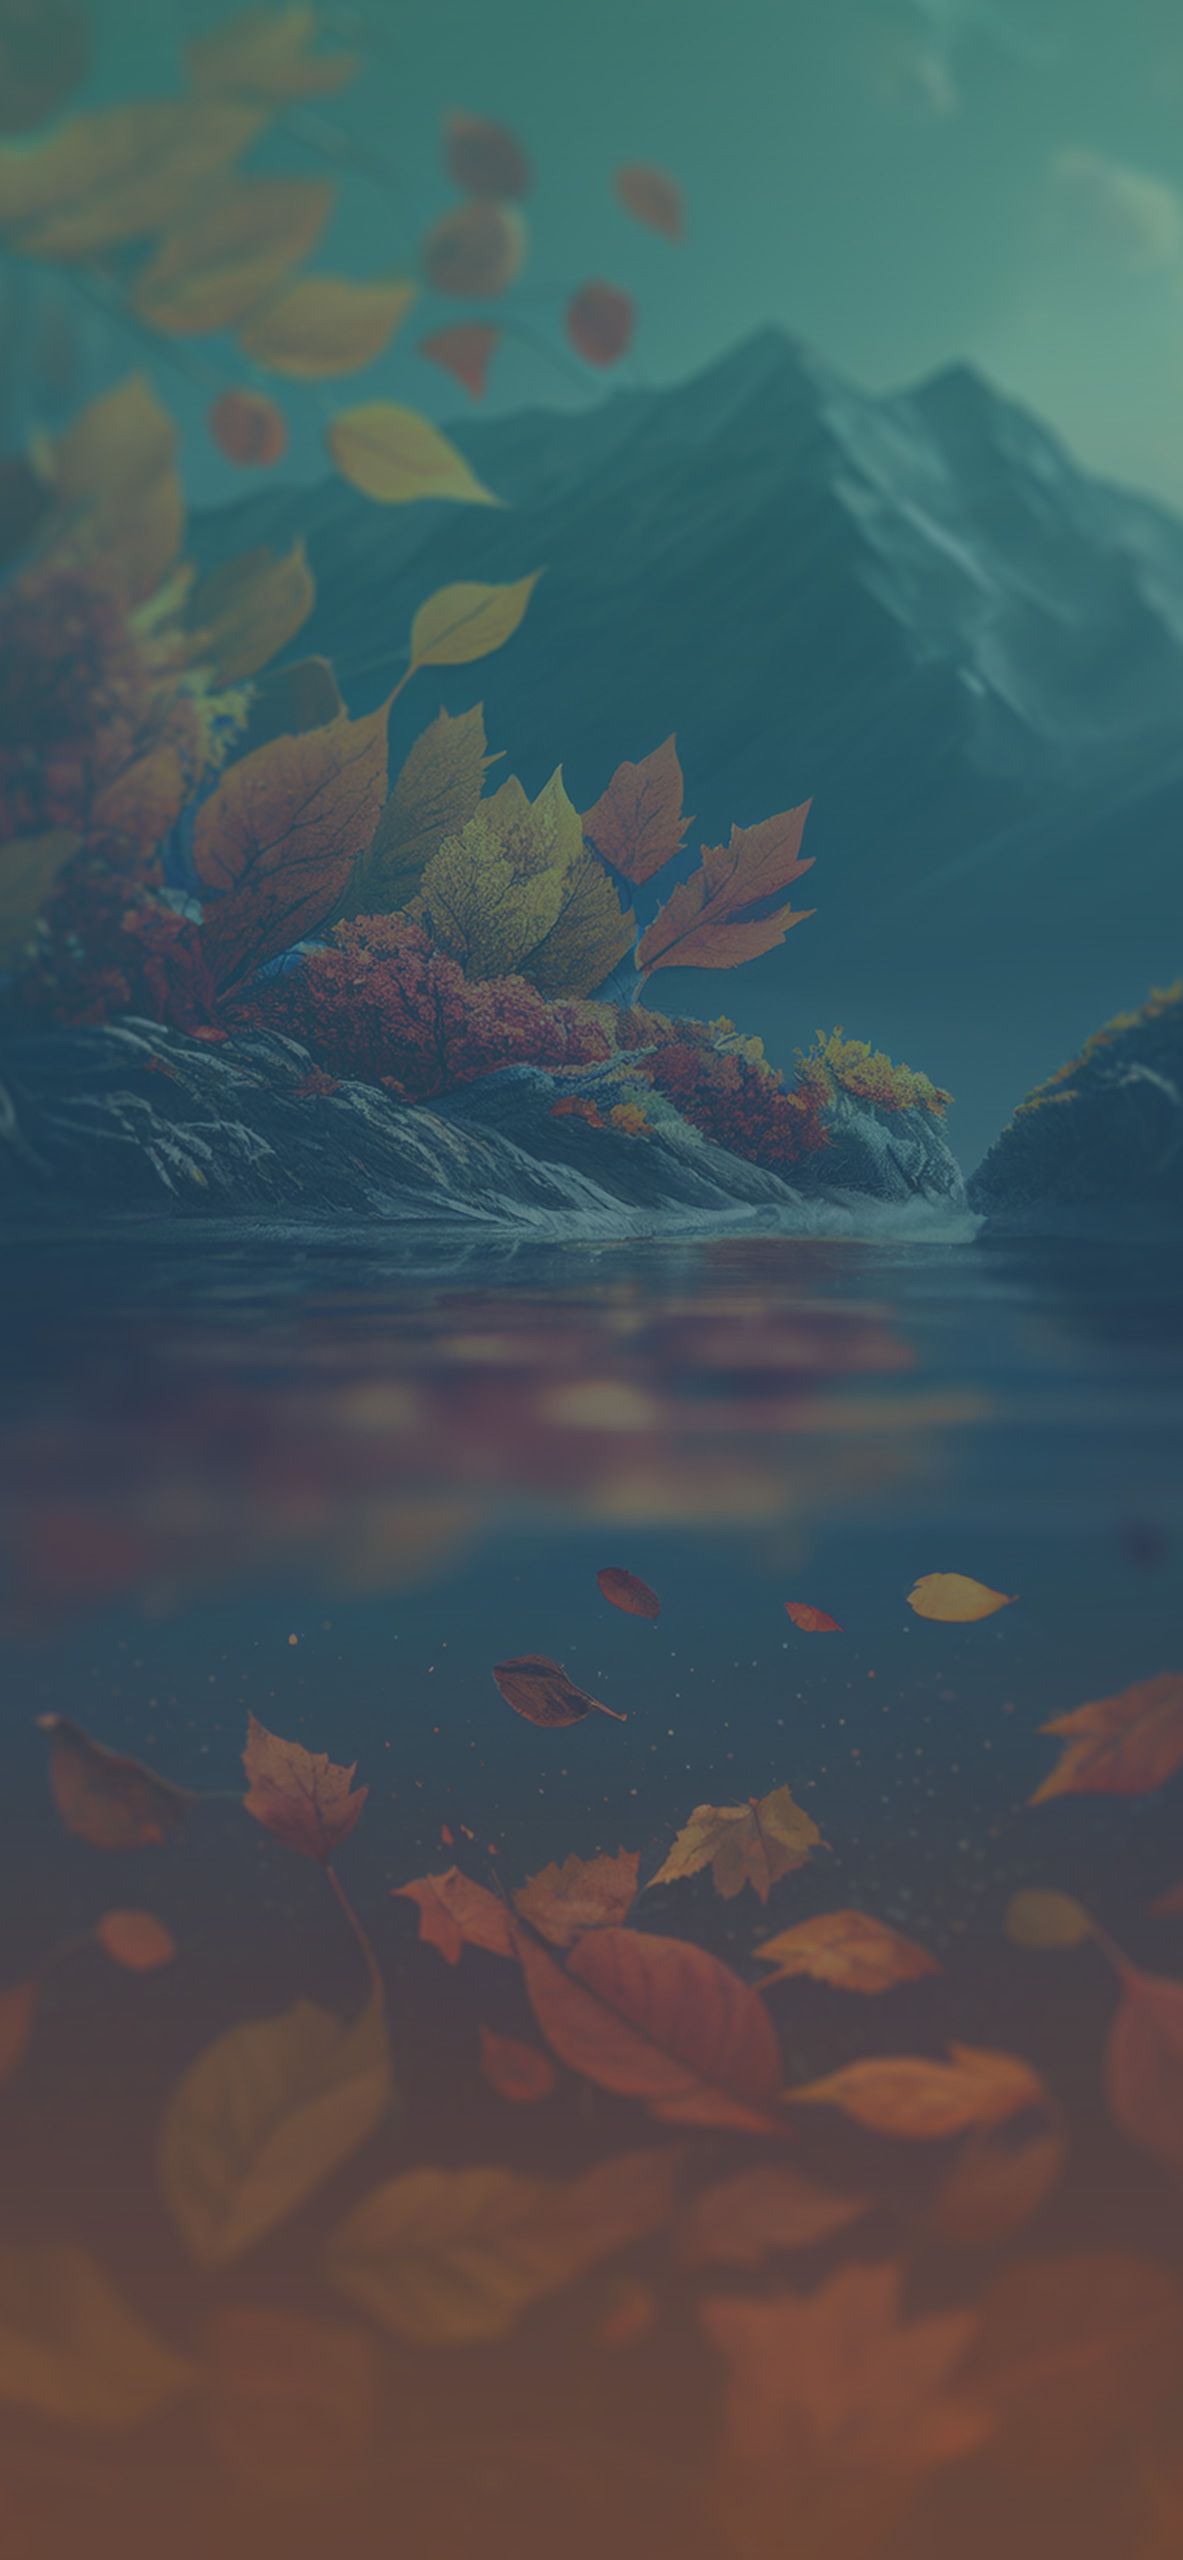 A beautiful wallpaper of a mountain lake with leaves floating on the surface - Lake